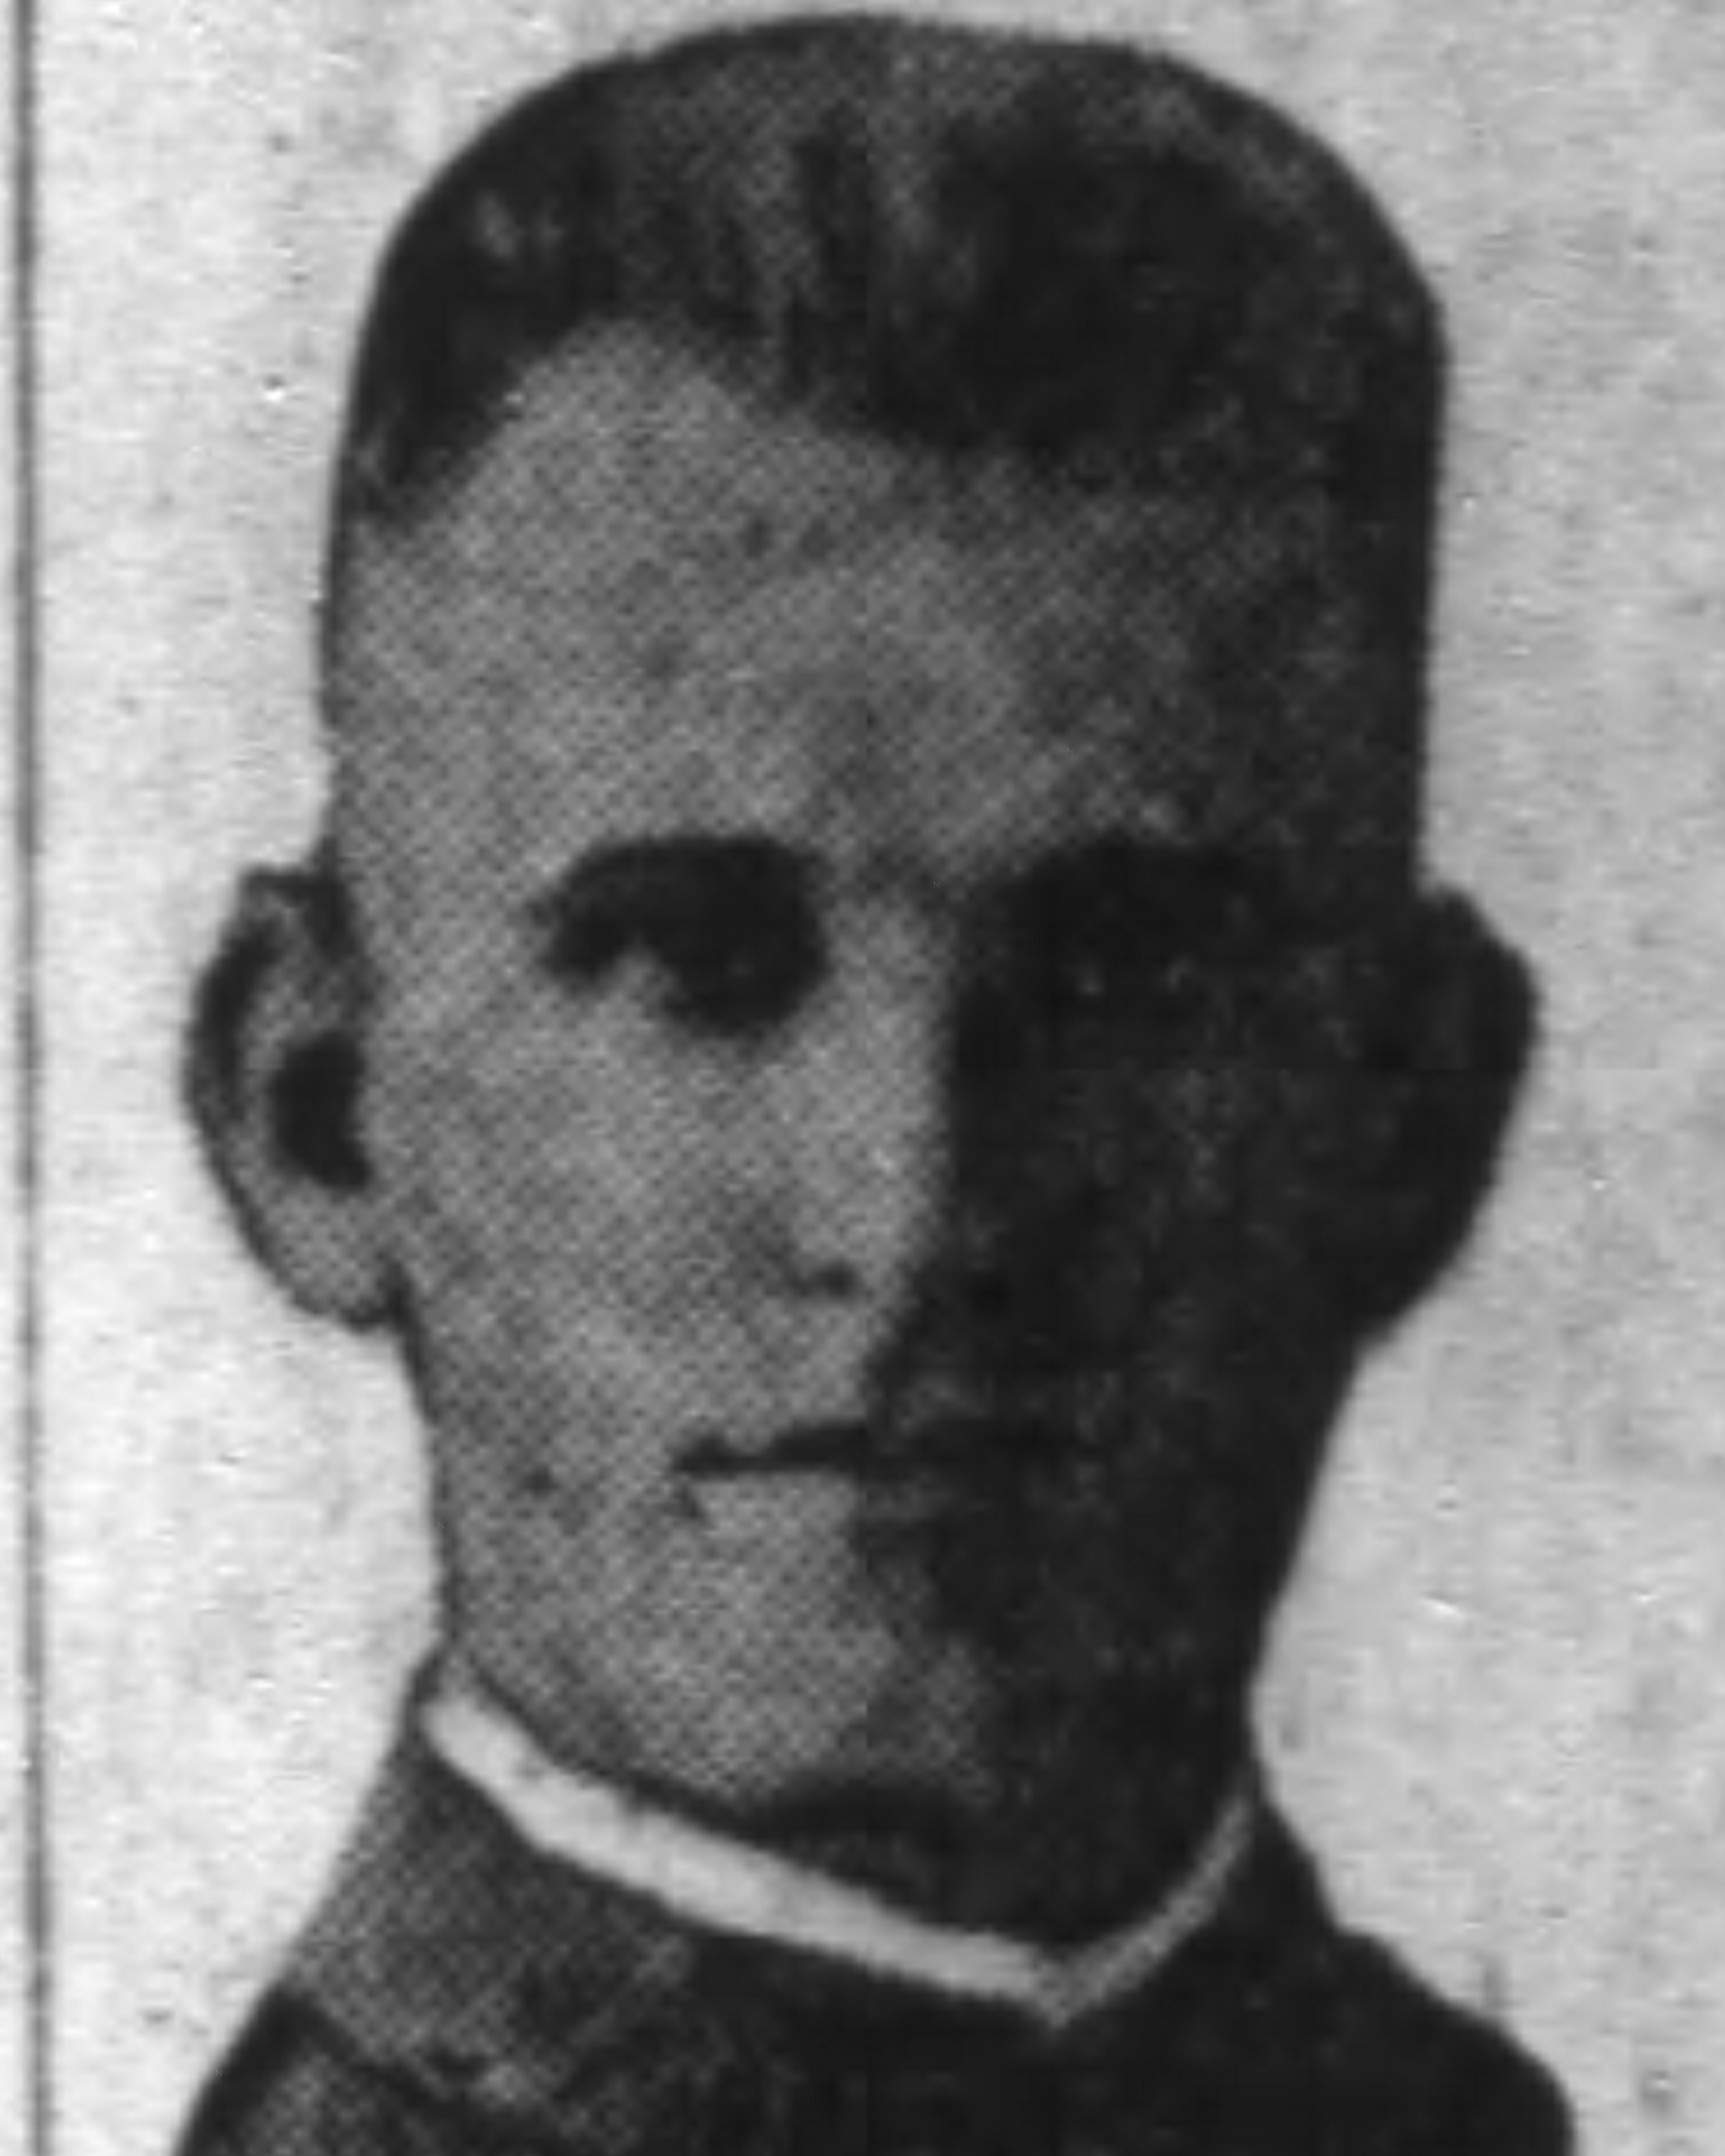 Police Officer Maurice Leahy, Jr. | Chicago and Northwestern Railroad Police Department, Railroad Police